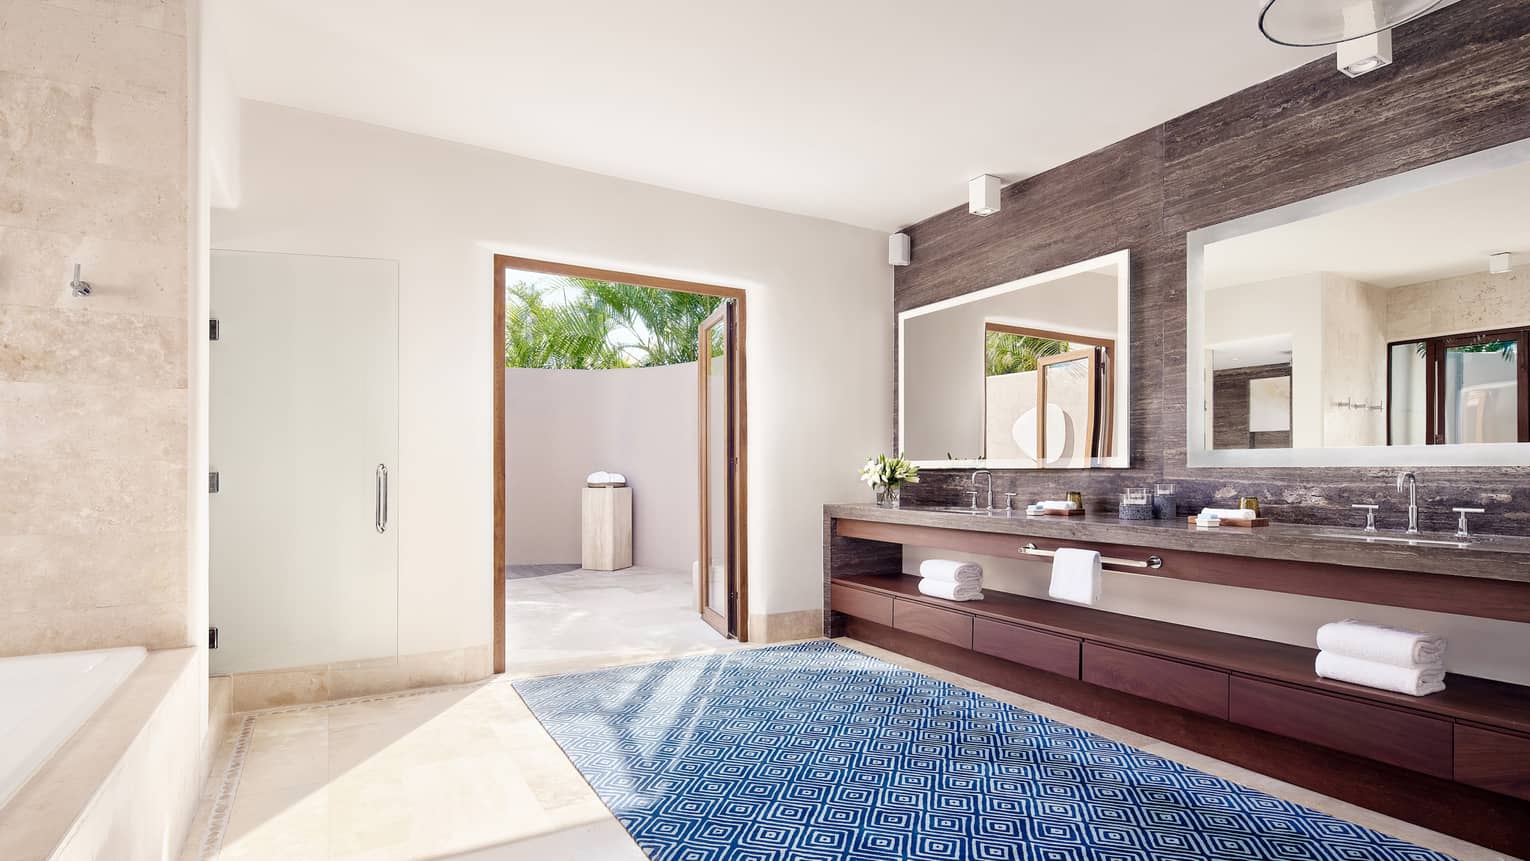 Arena Beach House bathroom with double vanity and mirrors, blue patterned area rug, door to patio